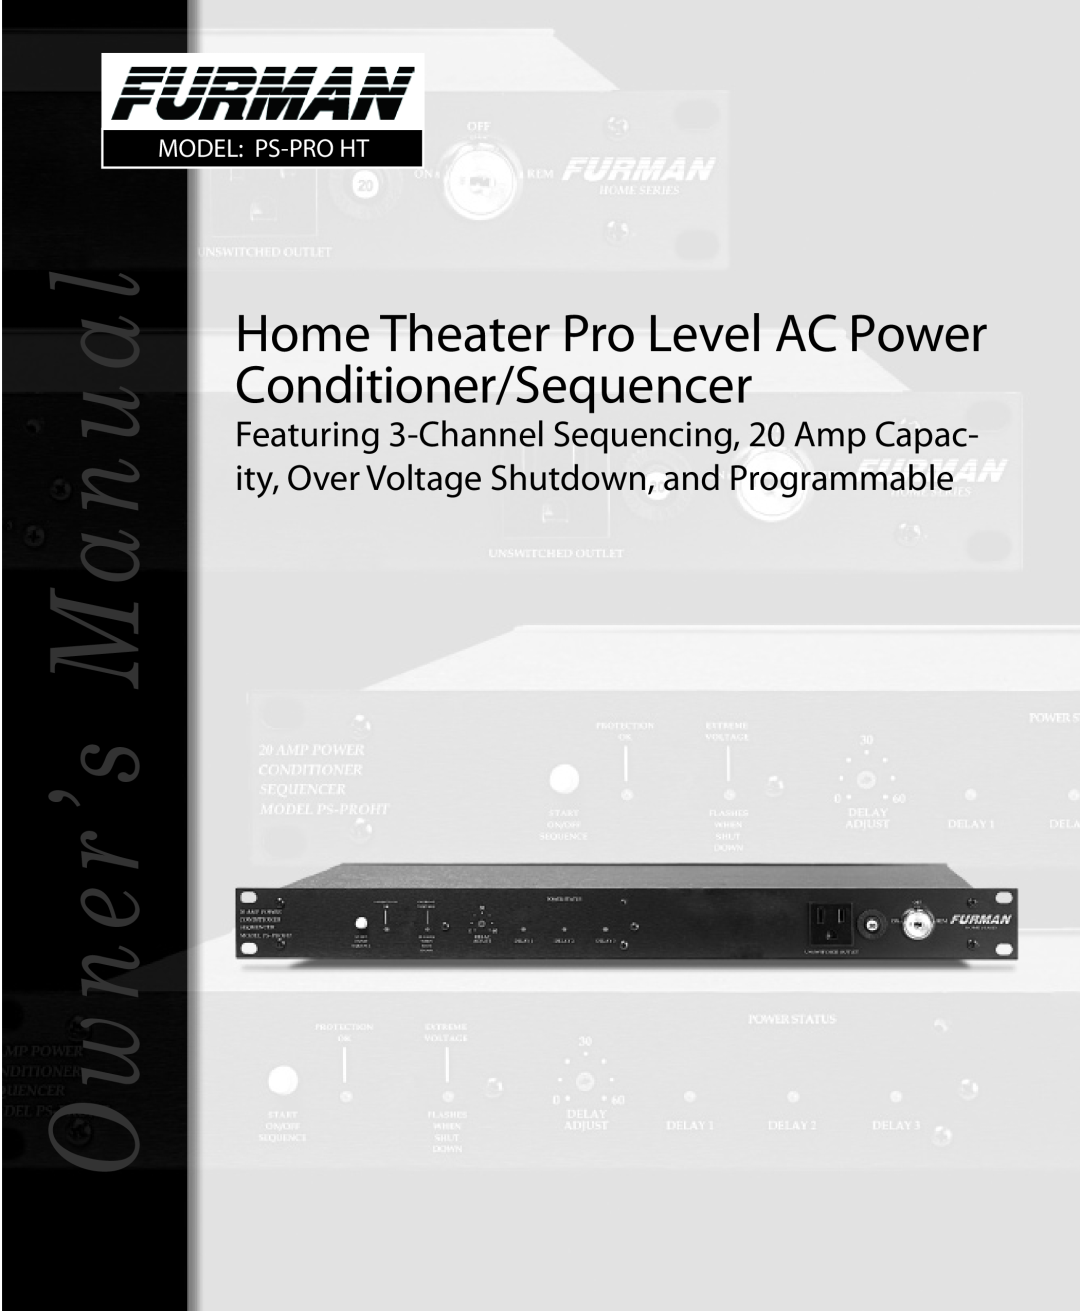 Furman Sound PS-PRO HT owner manual Manual, Owner’s, Home Theater Pro Level AC Power Conditioner/Sequencer 